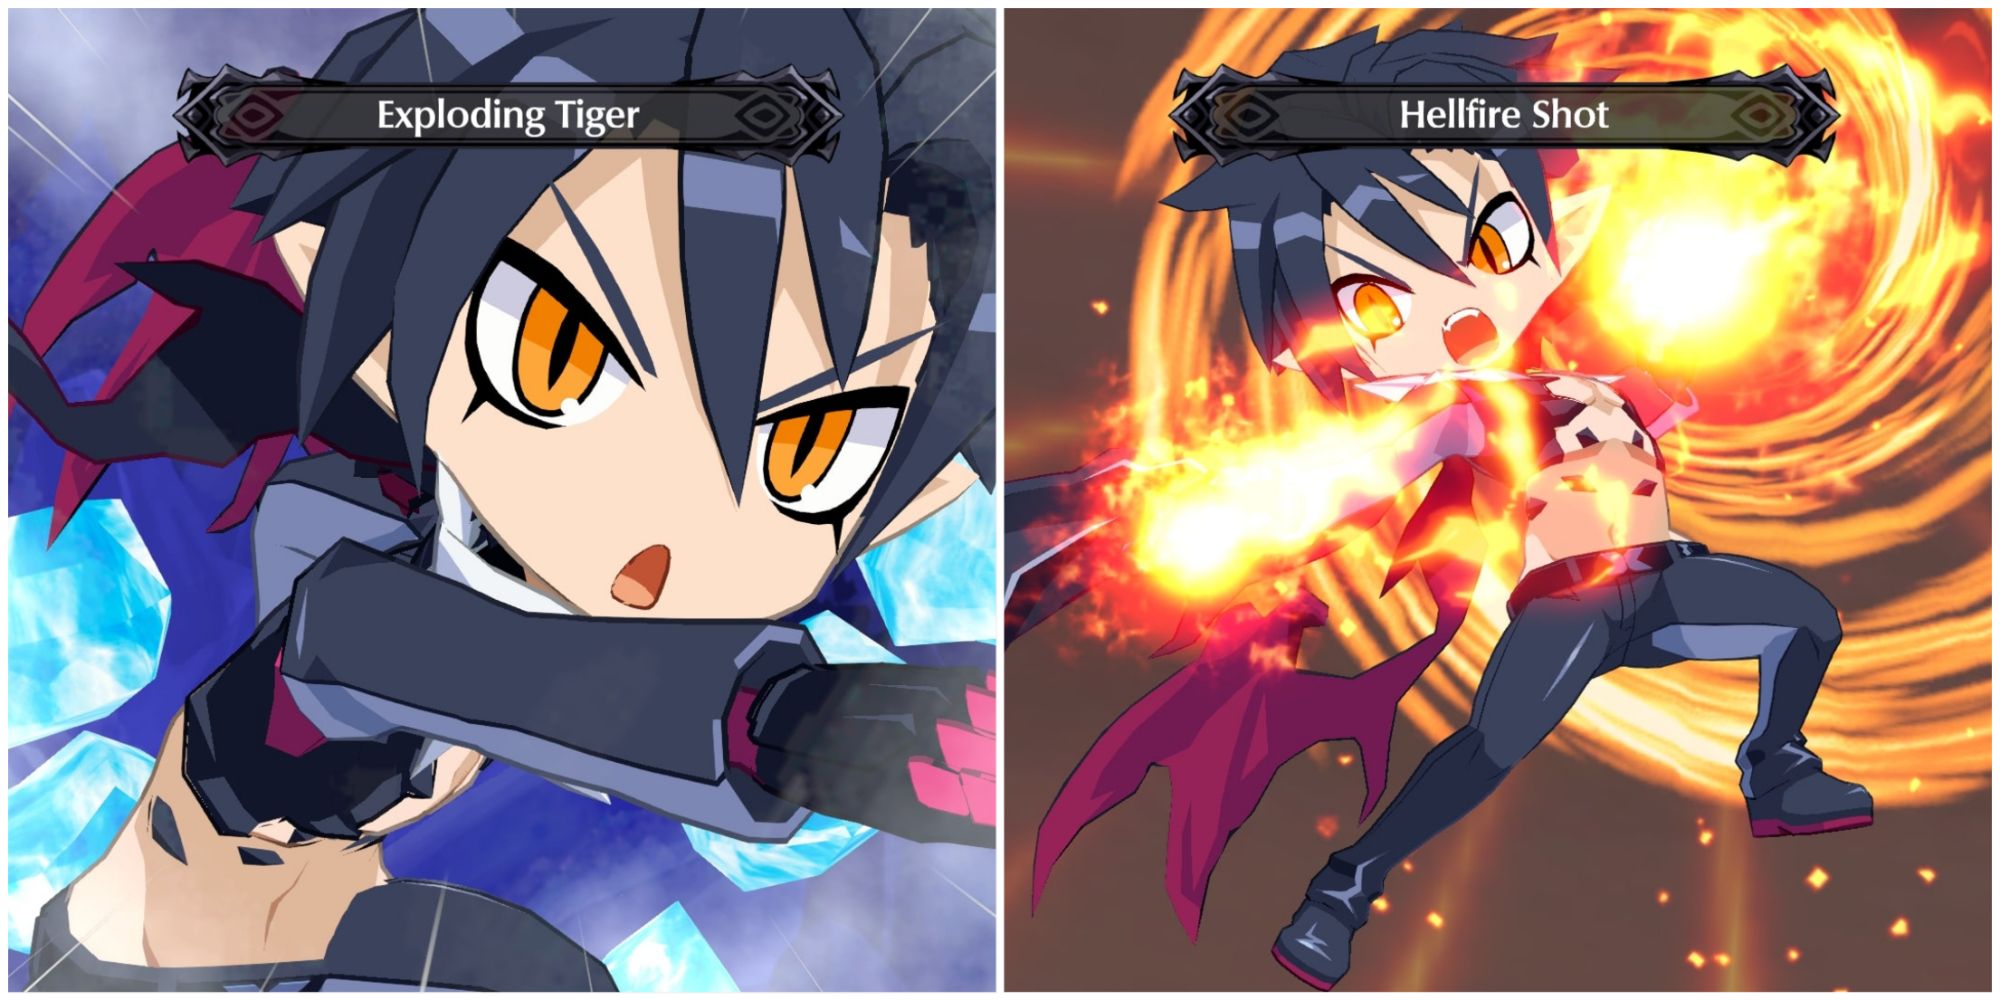 Disgaea 6 - collage of Killia attacking with Exploding Tiger and Hellfire Shot